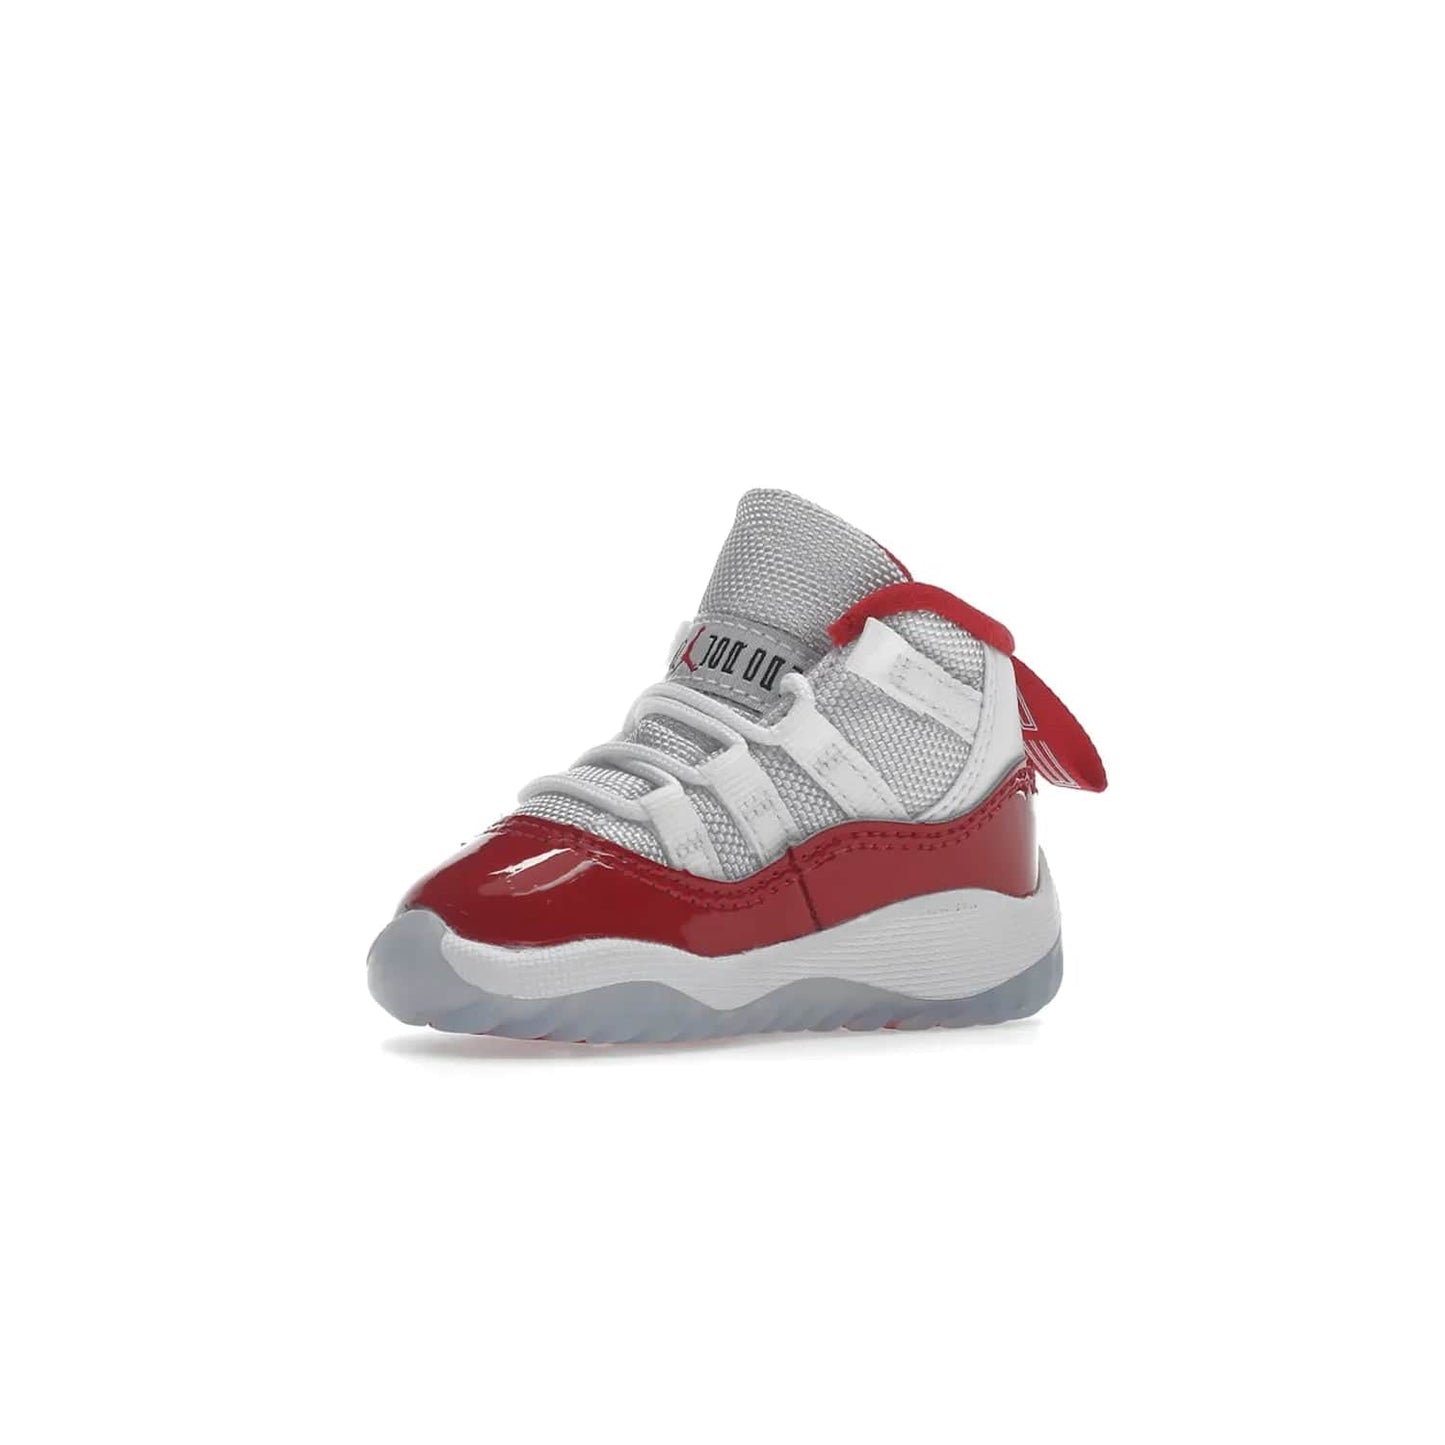 Jordan 11 Retro Cherry (2022) (TD) - Image 16 - Only at www.BallersClubKickz.com - Timeless classic. Air Jordan 11 Retro Cherry 2022 TD combines mesh, leather & suede for a unique look. White upper with varsity red suede. Jumpman logo on collar & tongue. Available Dec 10th, priced at $80.